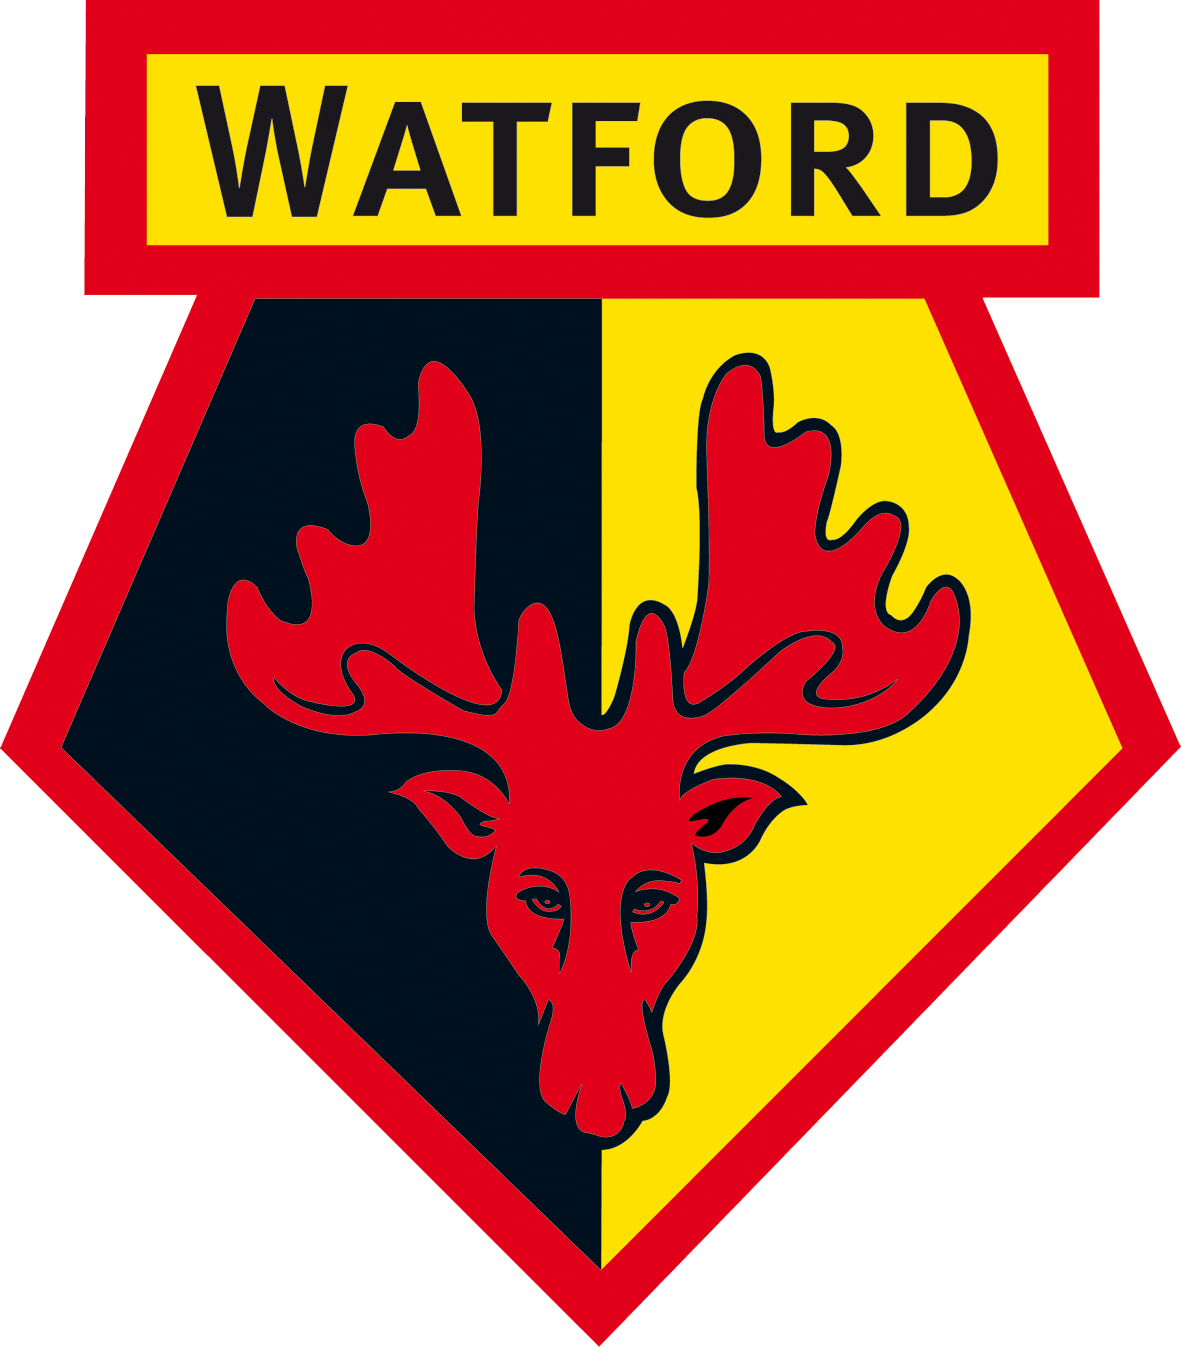 Stanmore College works with Watford Football Club